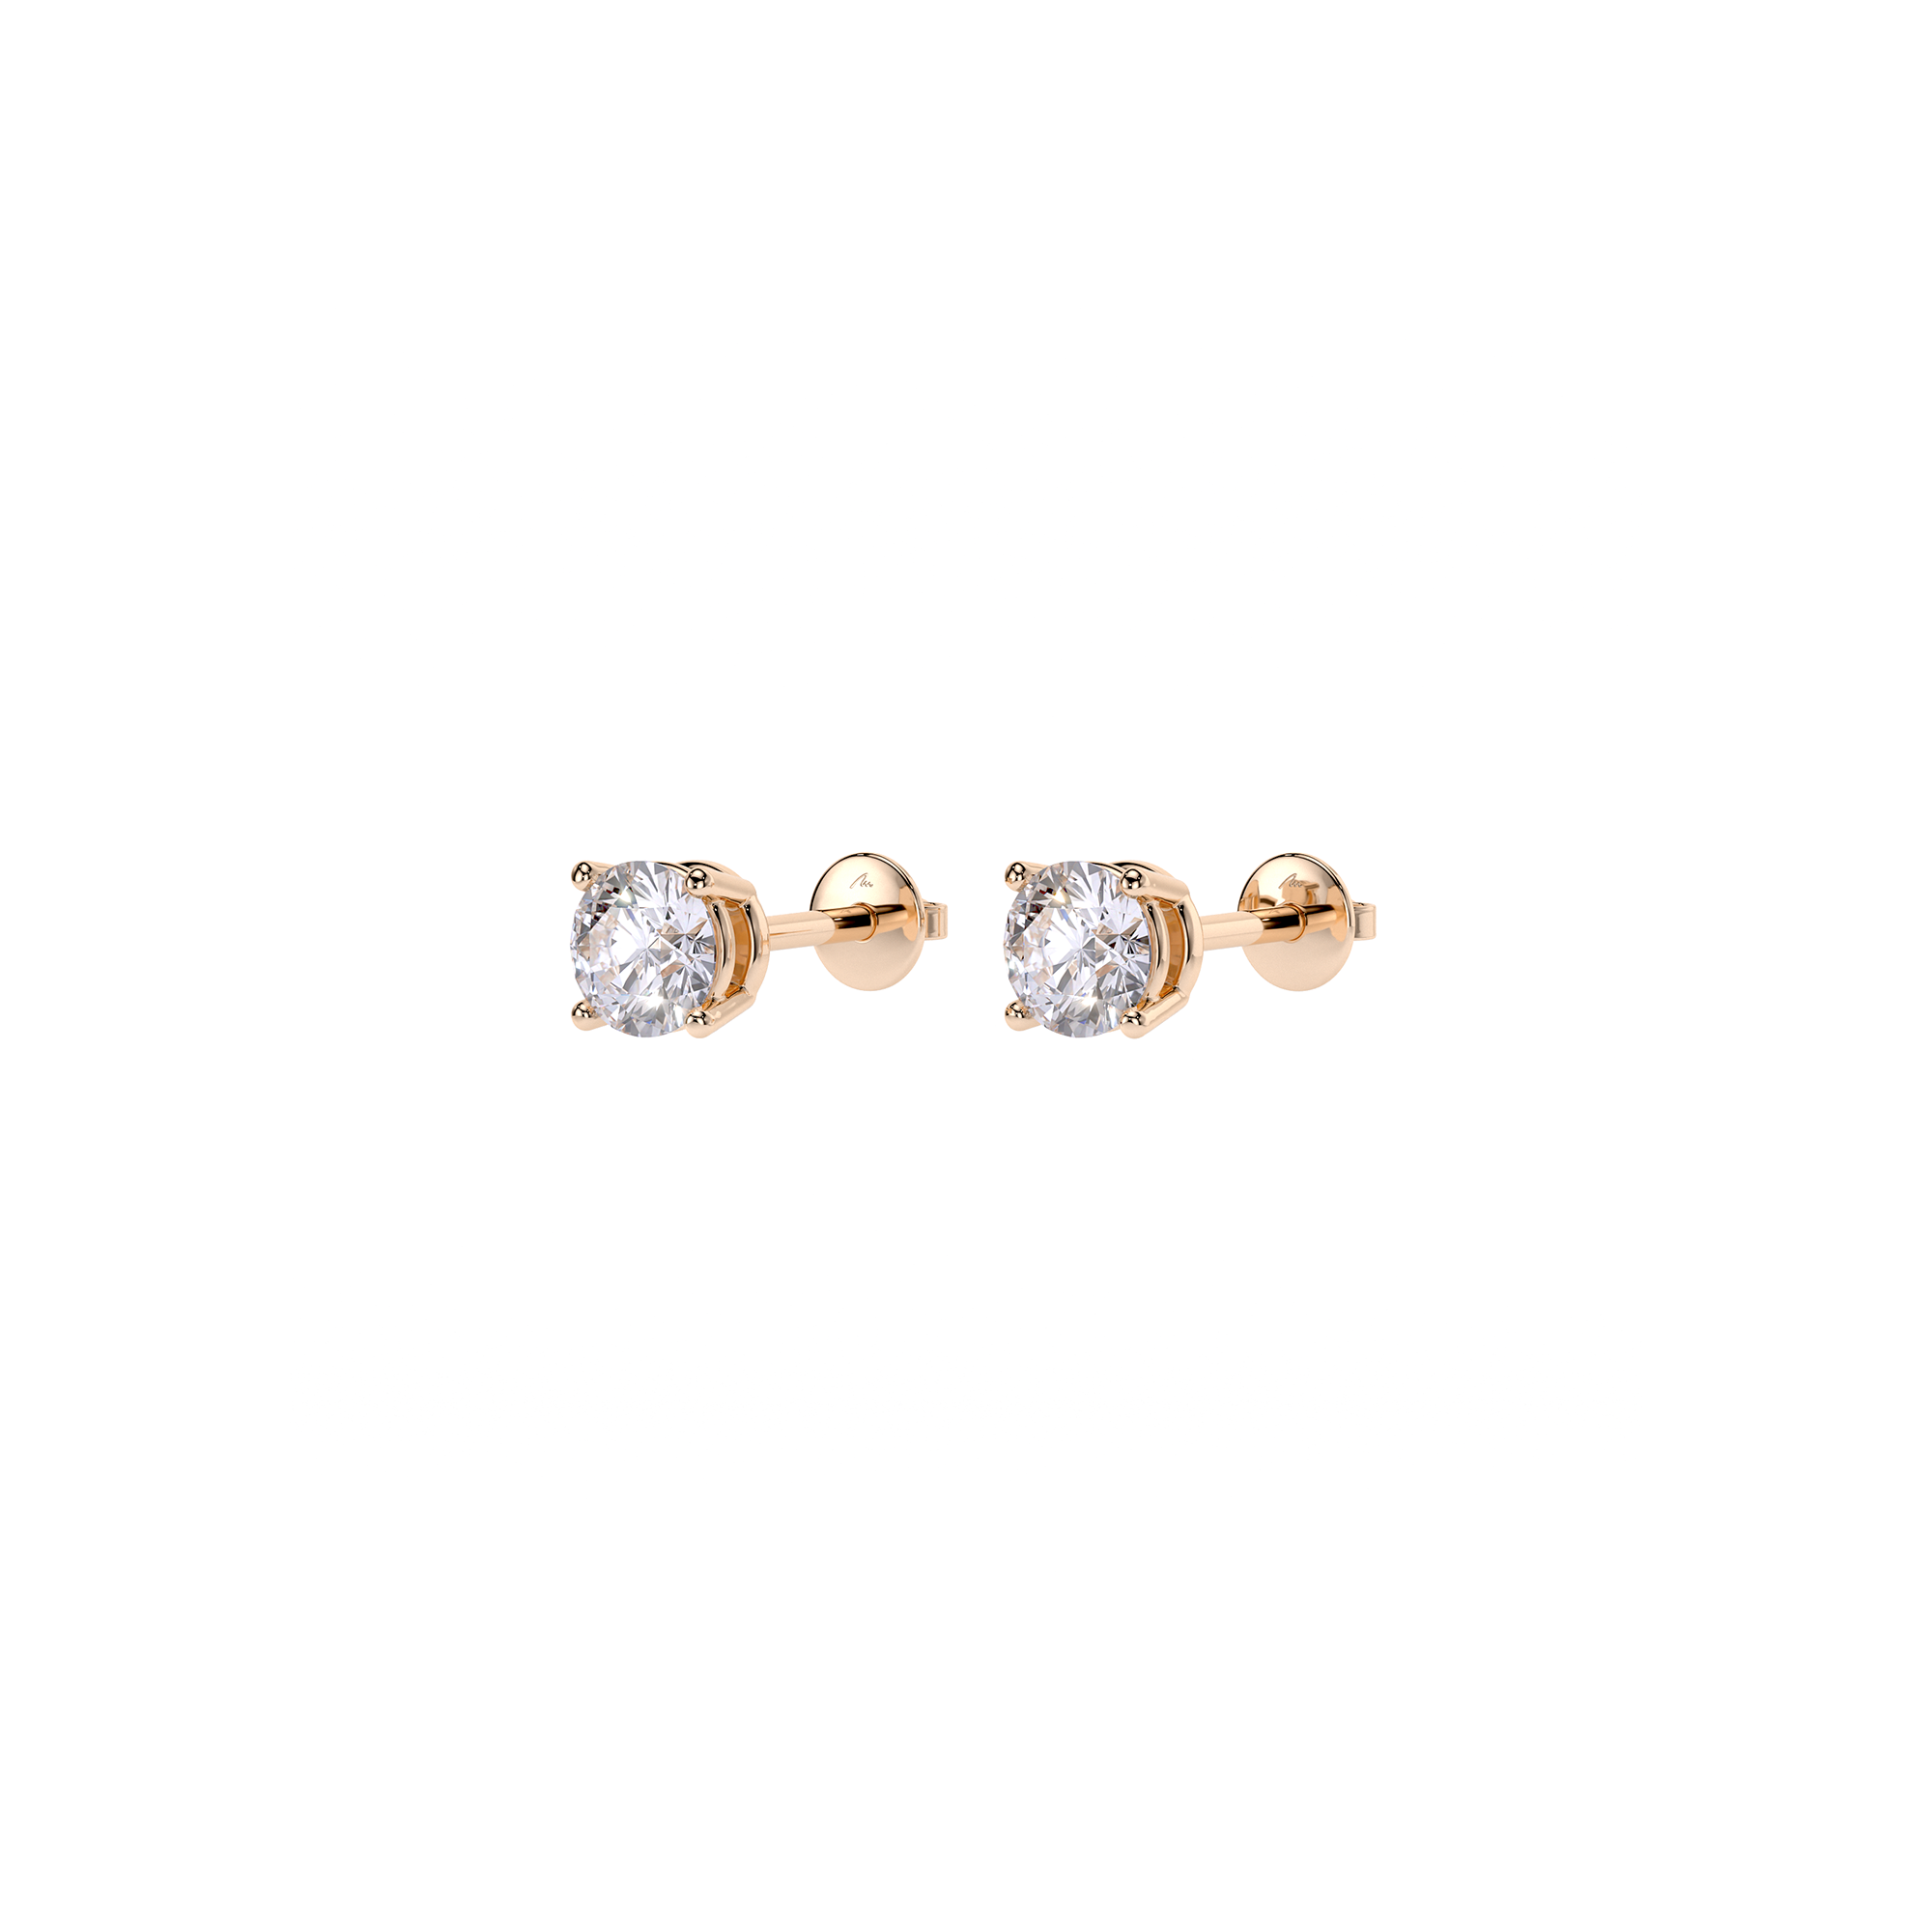 14 K rose gold Studs earrings with 1.04 CT Lab Diamonds